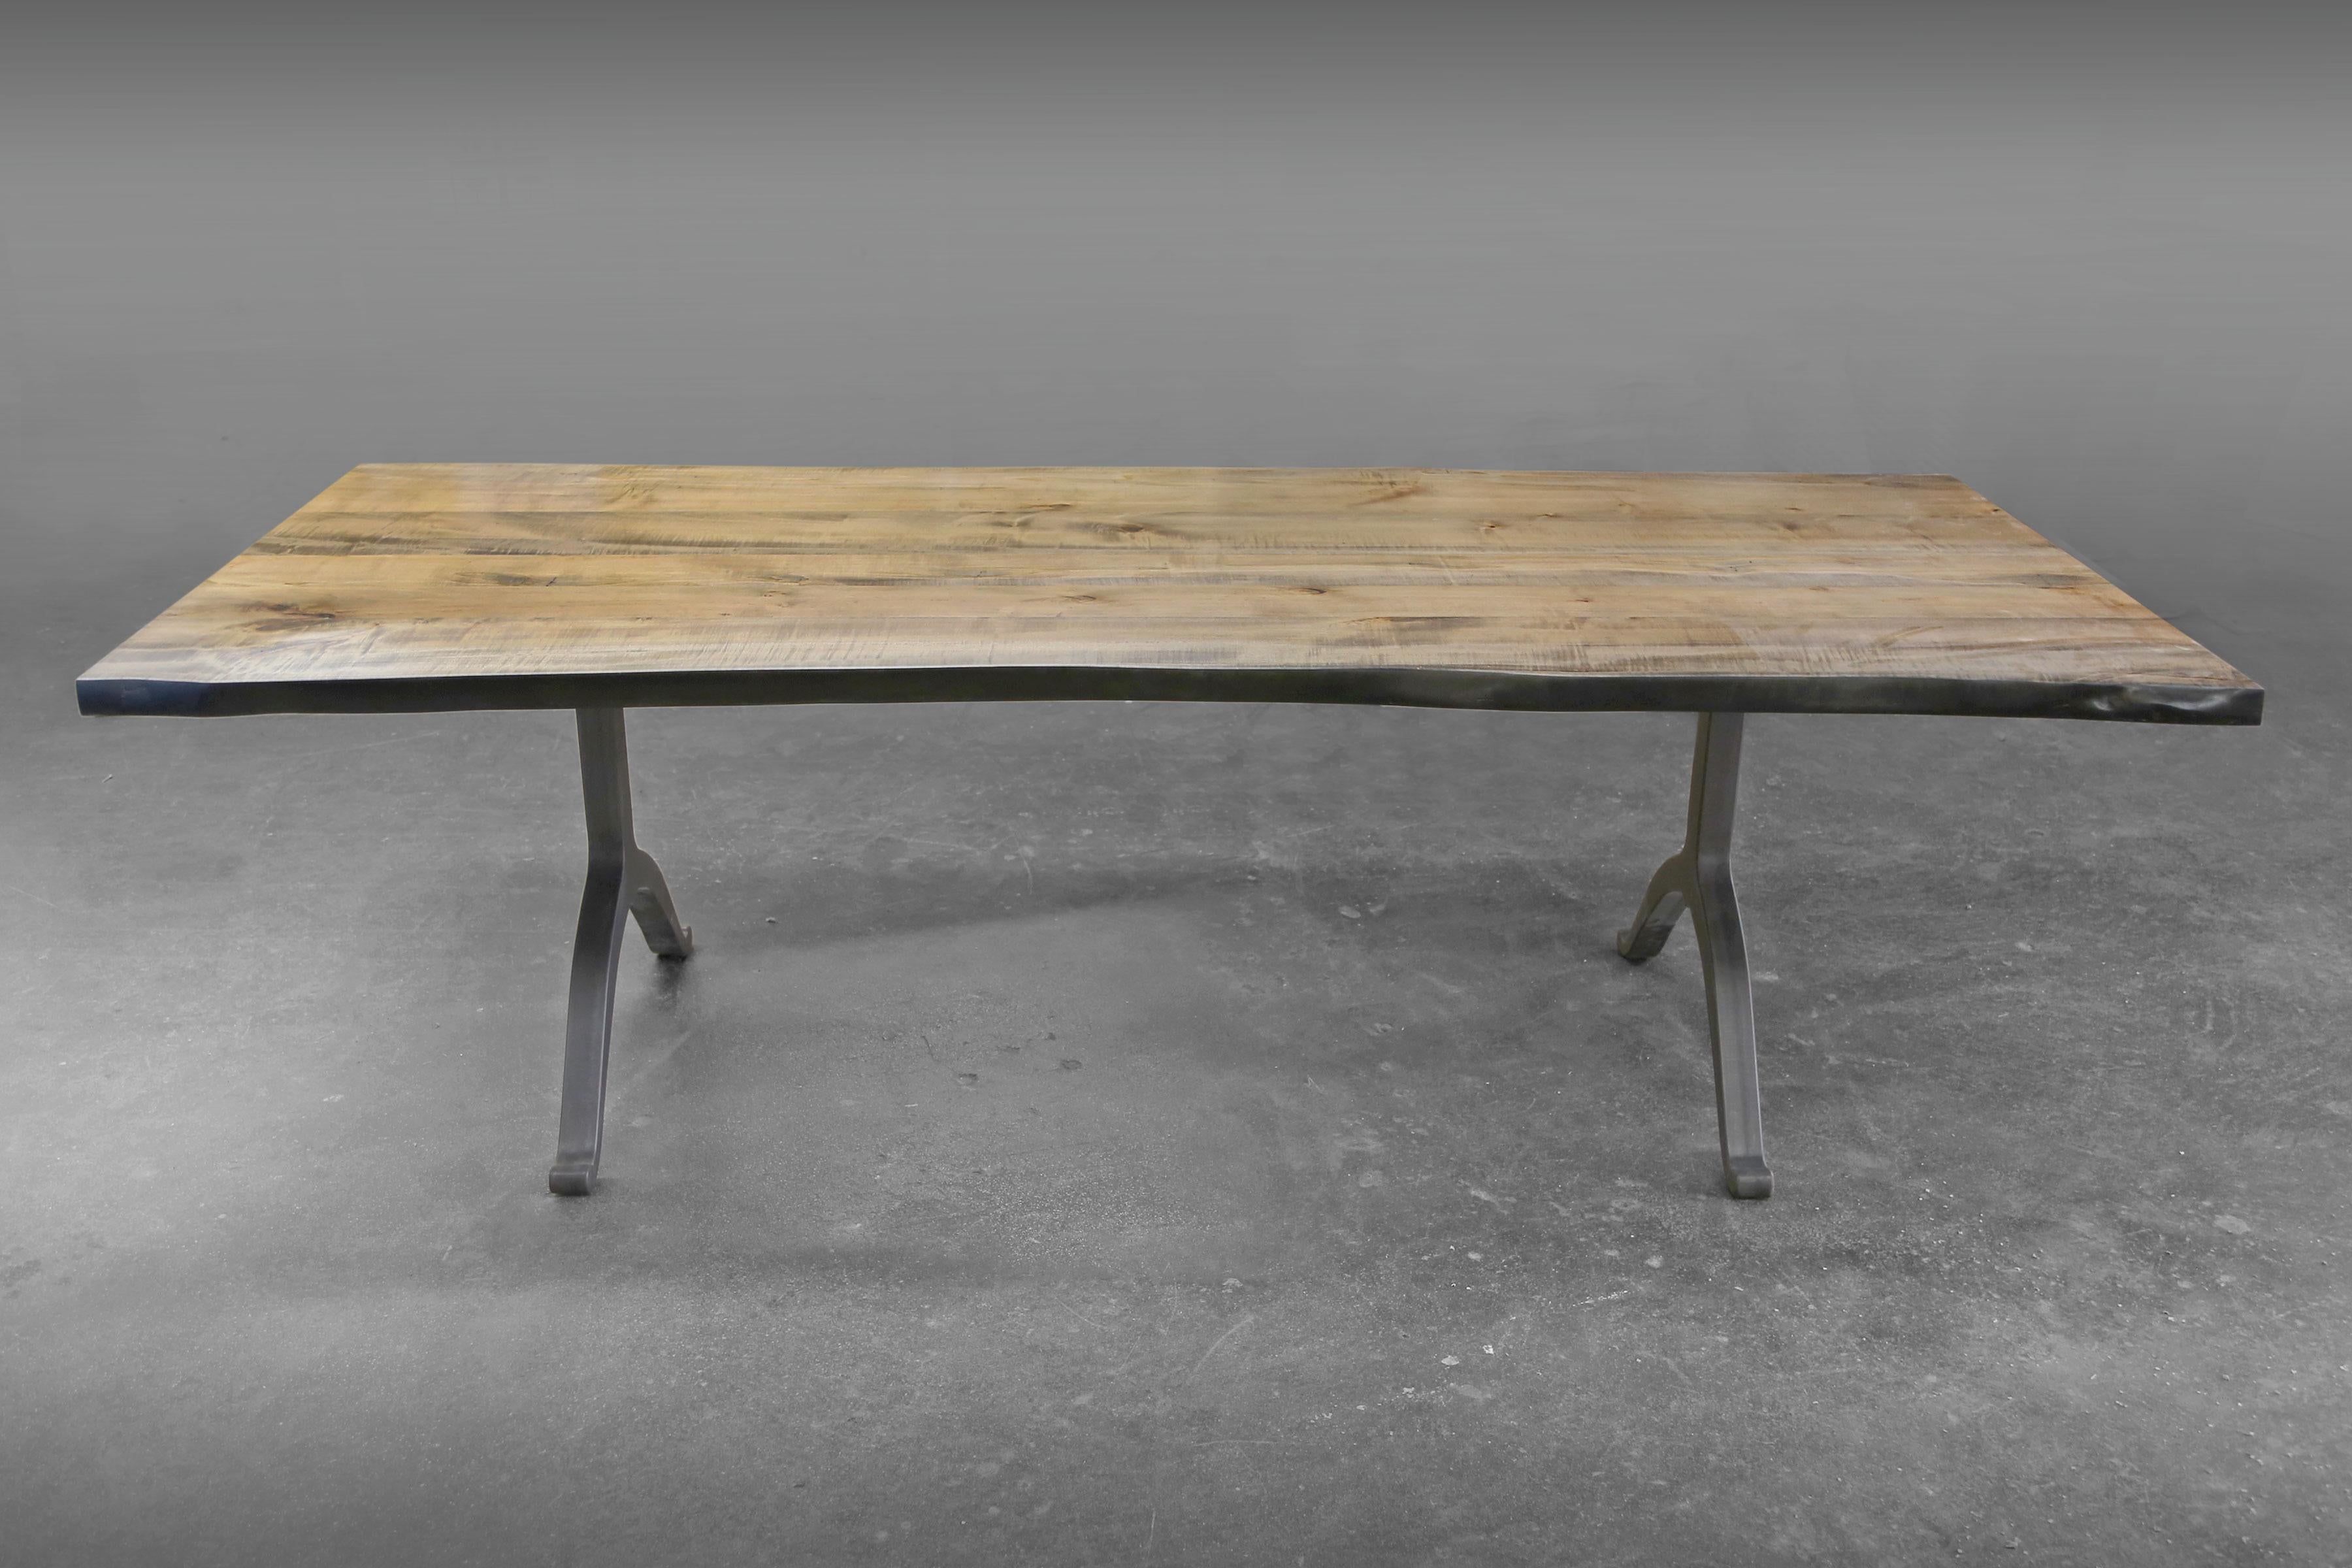 Signature Maple Live Edge Slab Table Driftwood Finish Steel Wishbone Legs In New Condition For Sale In Brooklyn, NY